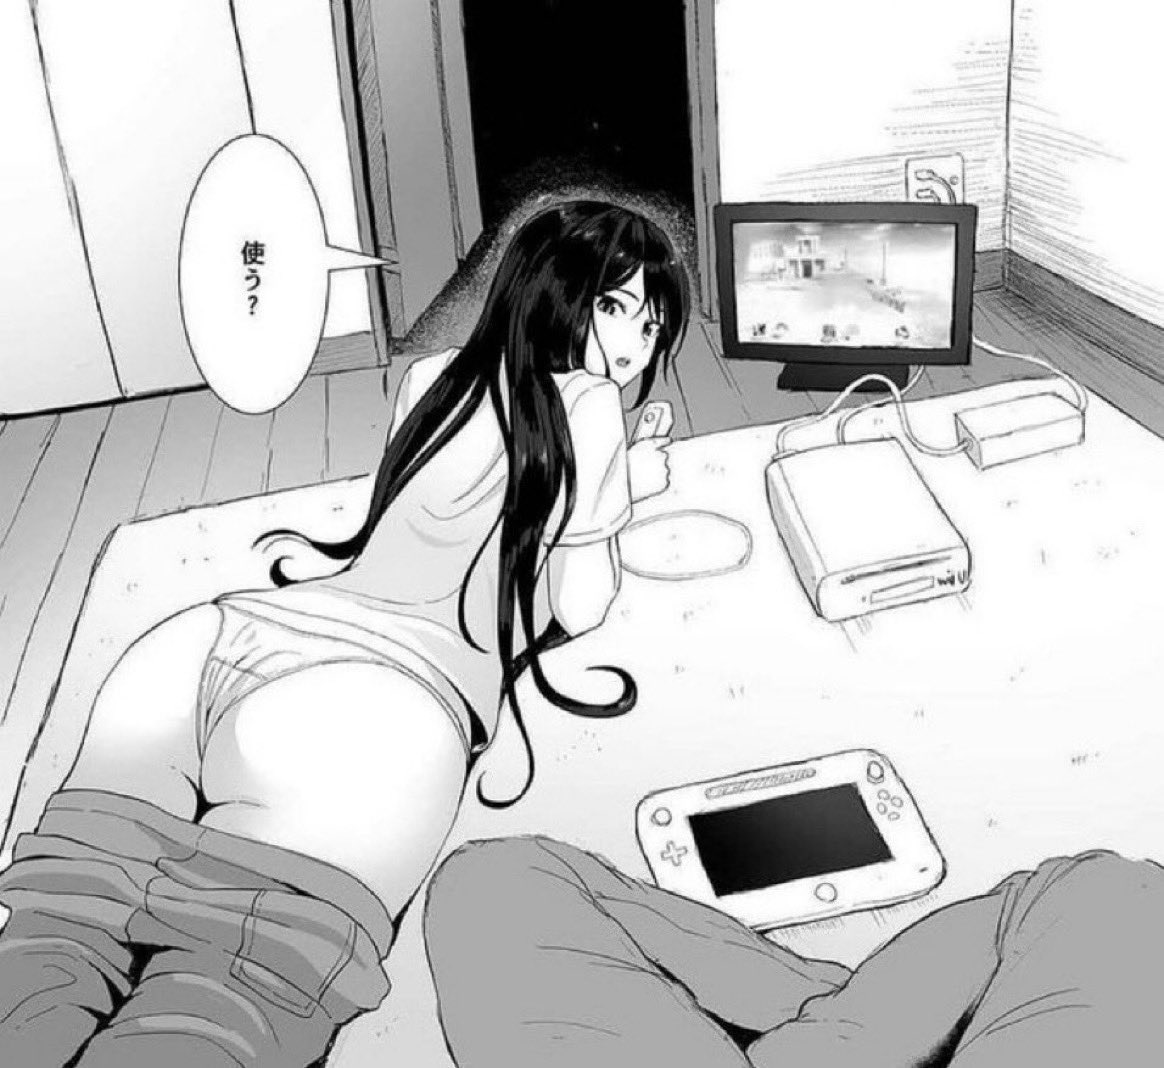 She’s playing with wiimote and nunchuk, instead of sideways wiimote.

Truly, she deserves to be cherished.